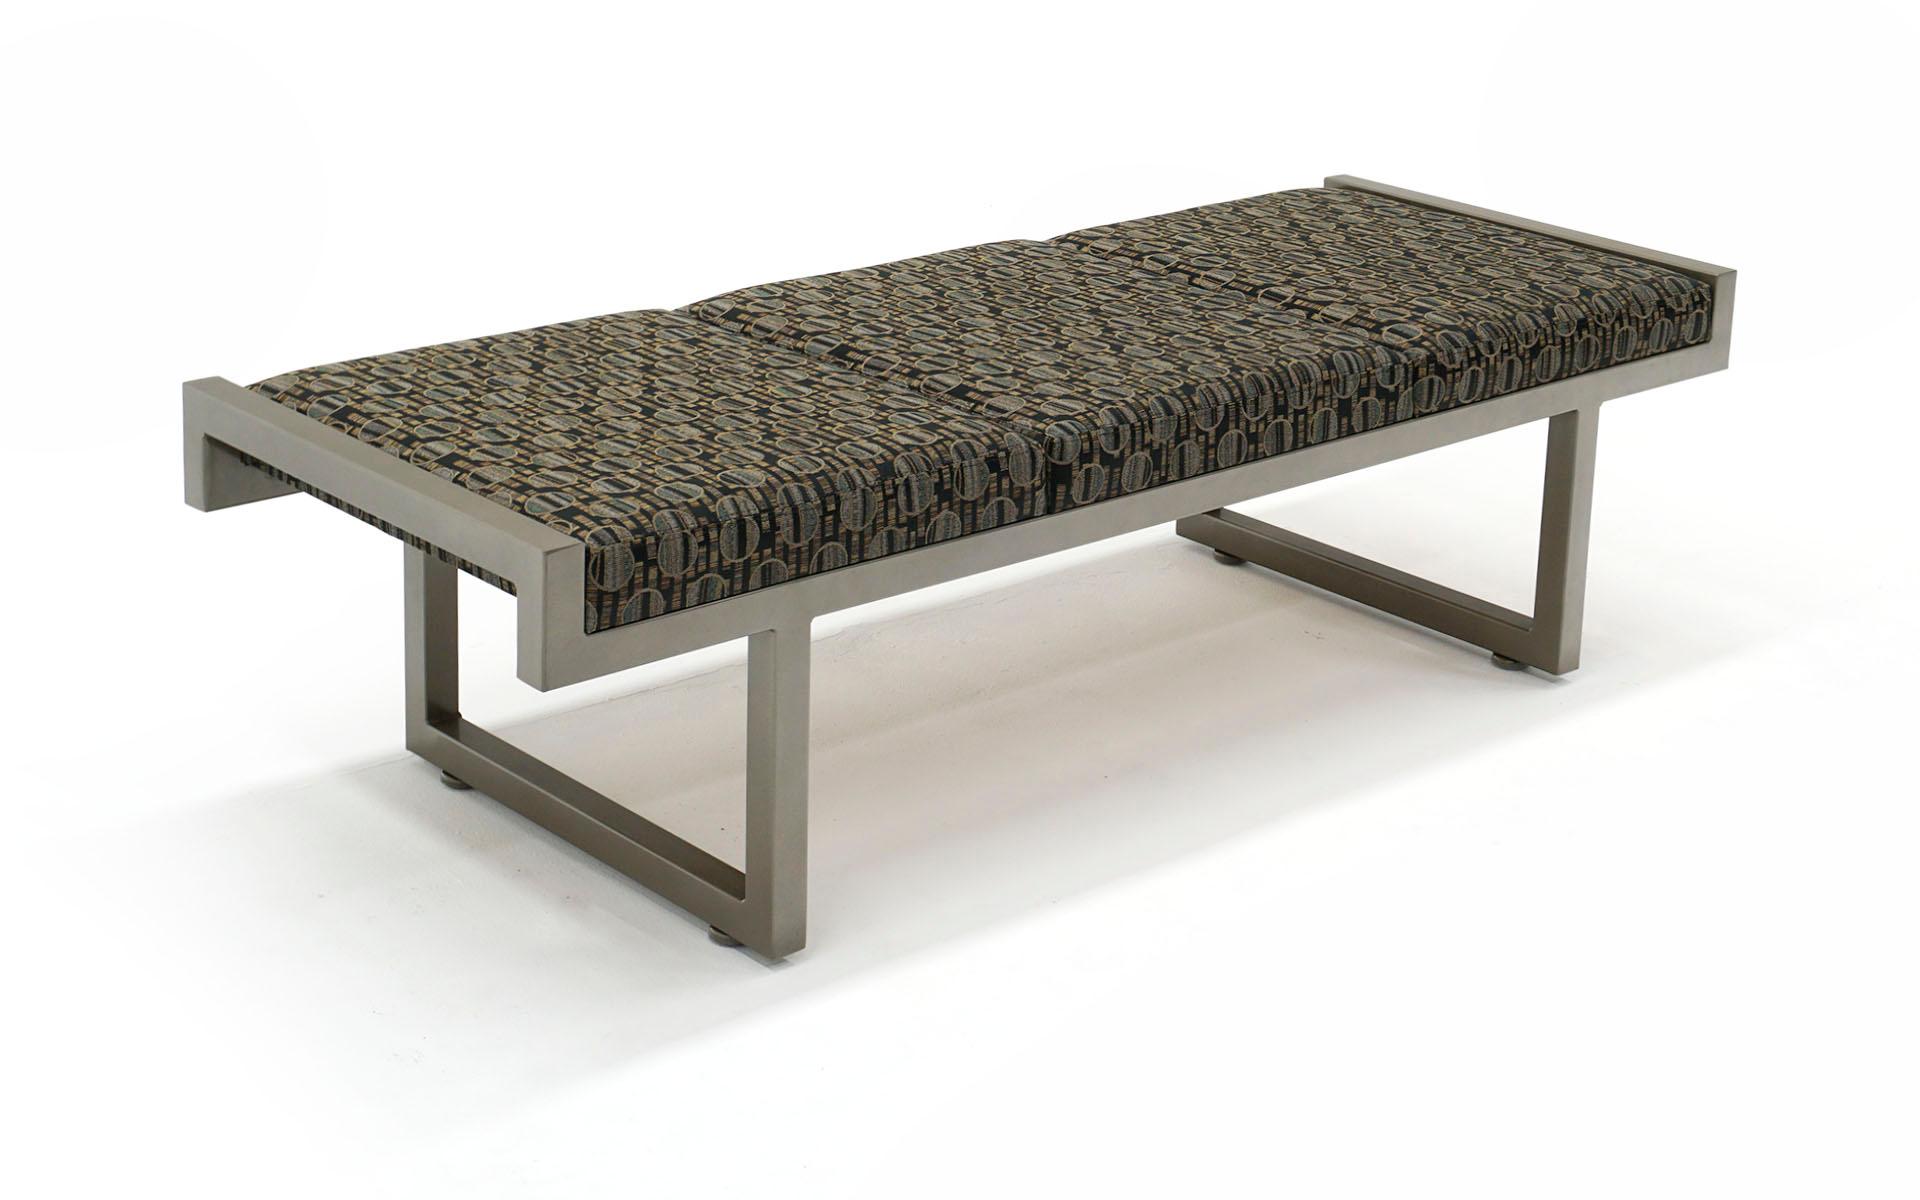 Contemporary Upholstered Bench in Like New Condition. Heavy Steel Frame in Gray / Taupe